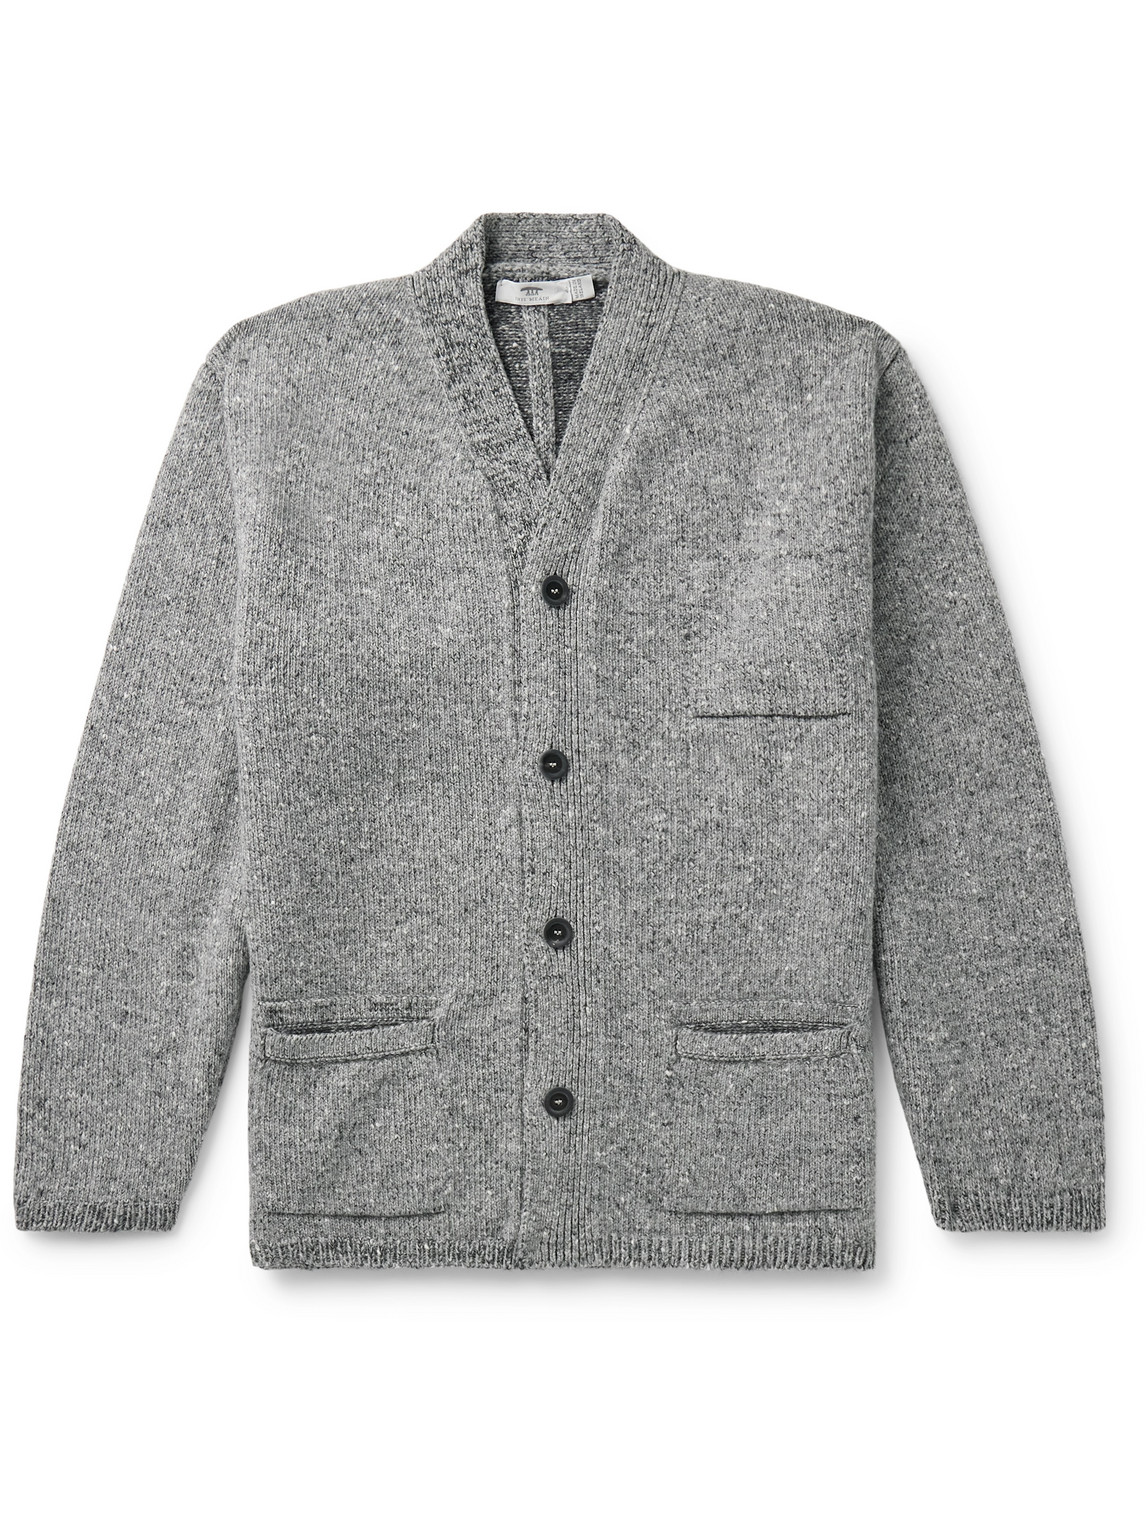 Inis Meain Oversized Donegal Merino Wool And Cashmere-blend Cardigan In Gray